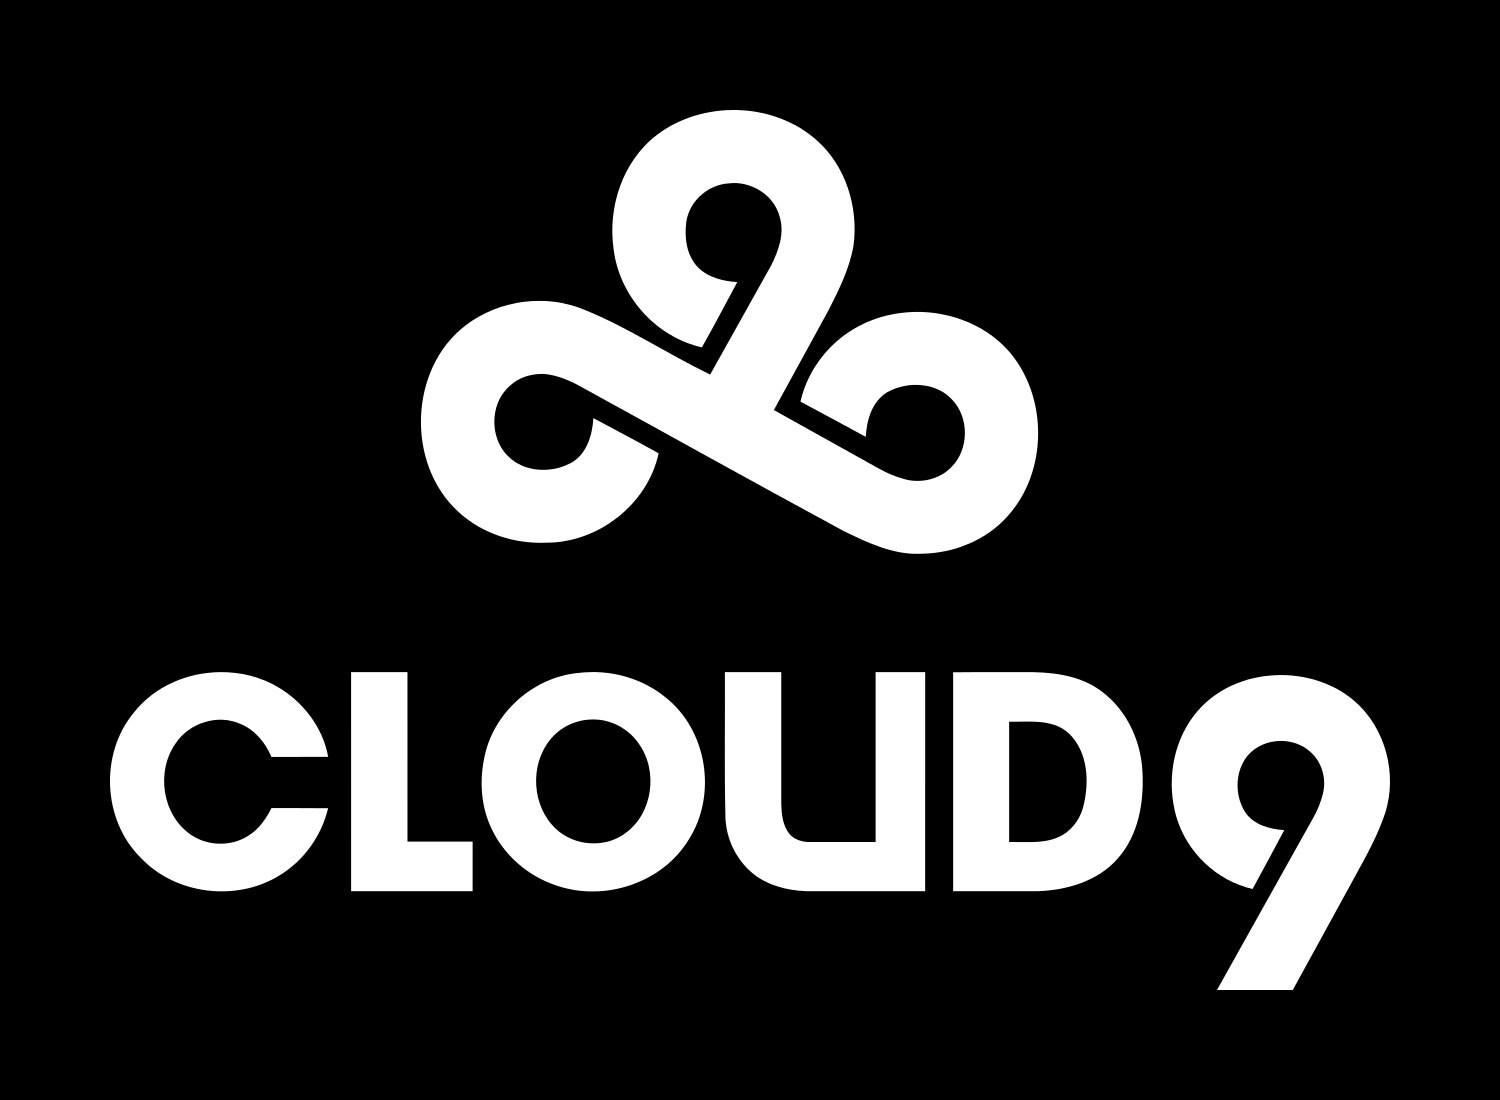 Meaning Cloud 9 logo and symbol | history and evolution
